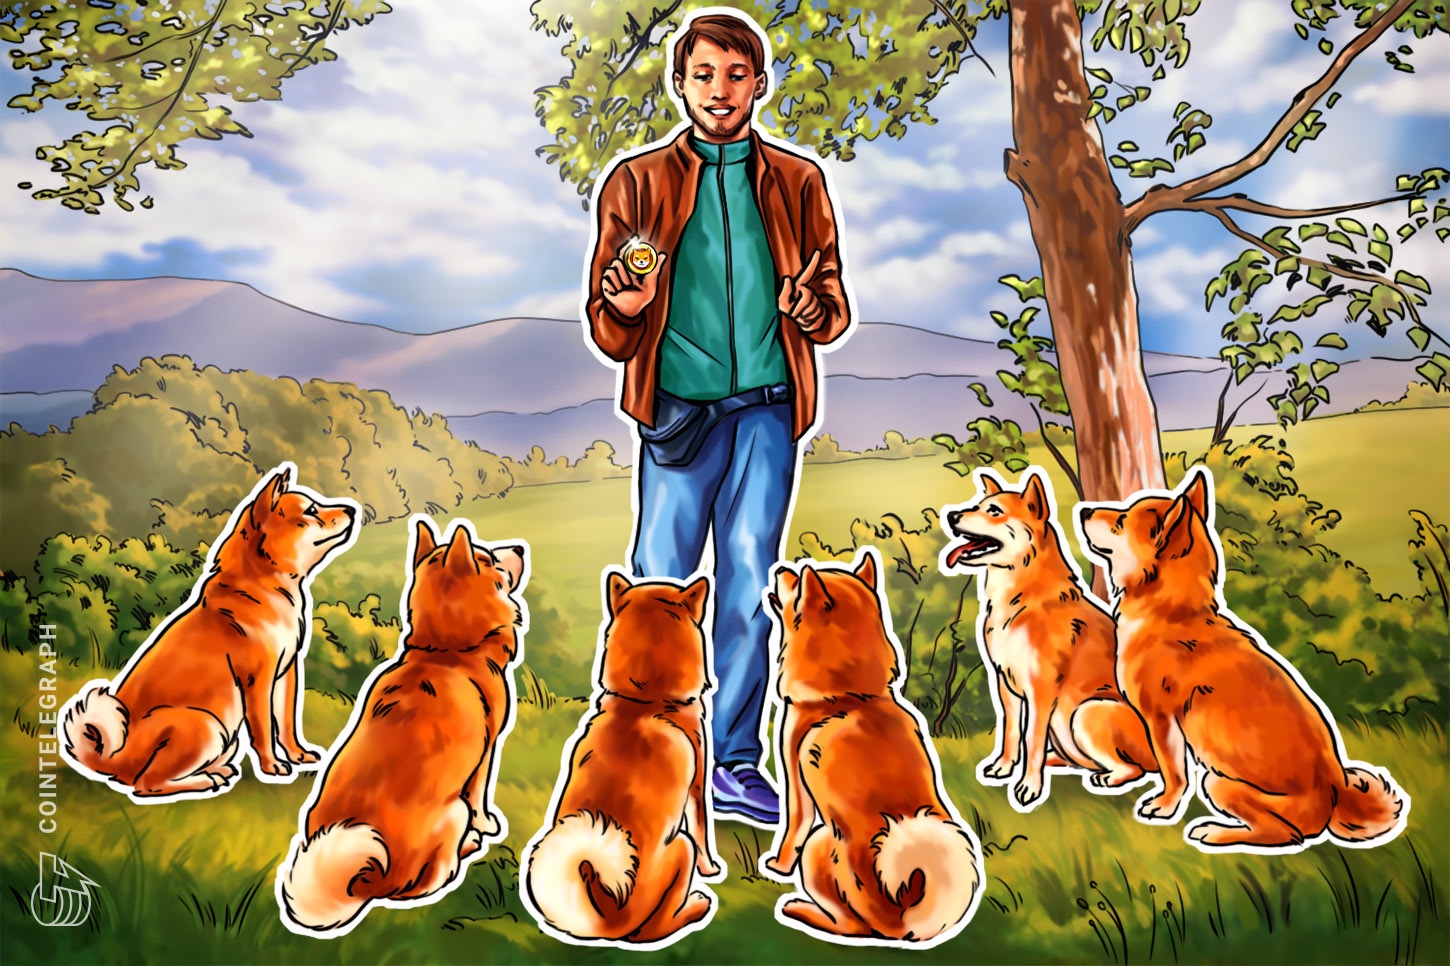 Shiba-inu-developer-says-wef-wants-to-work-with-project-to-‘help-shape’-metaverse-global-policy